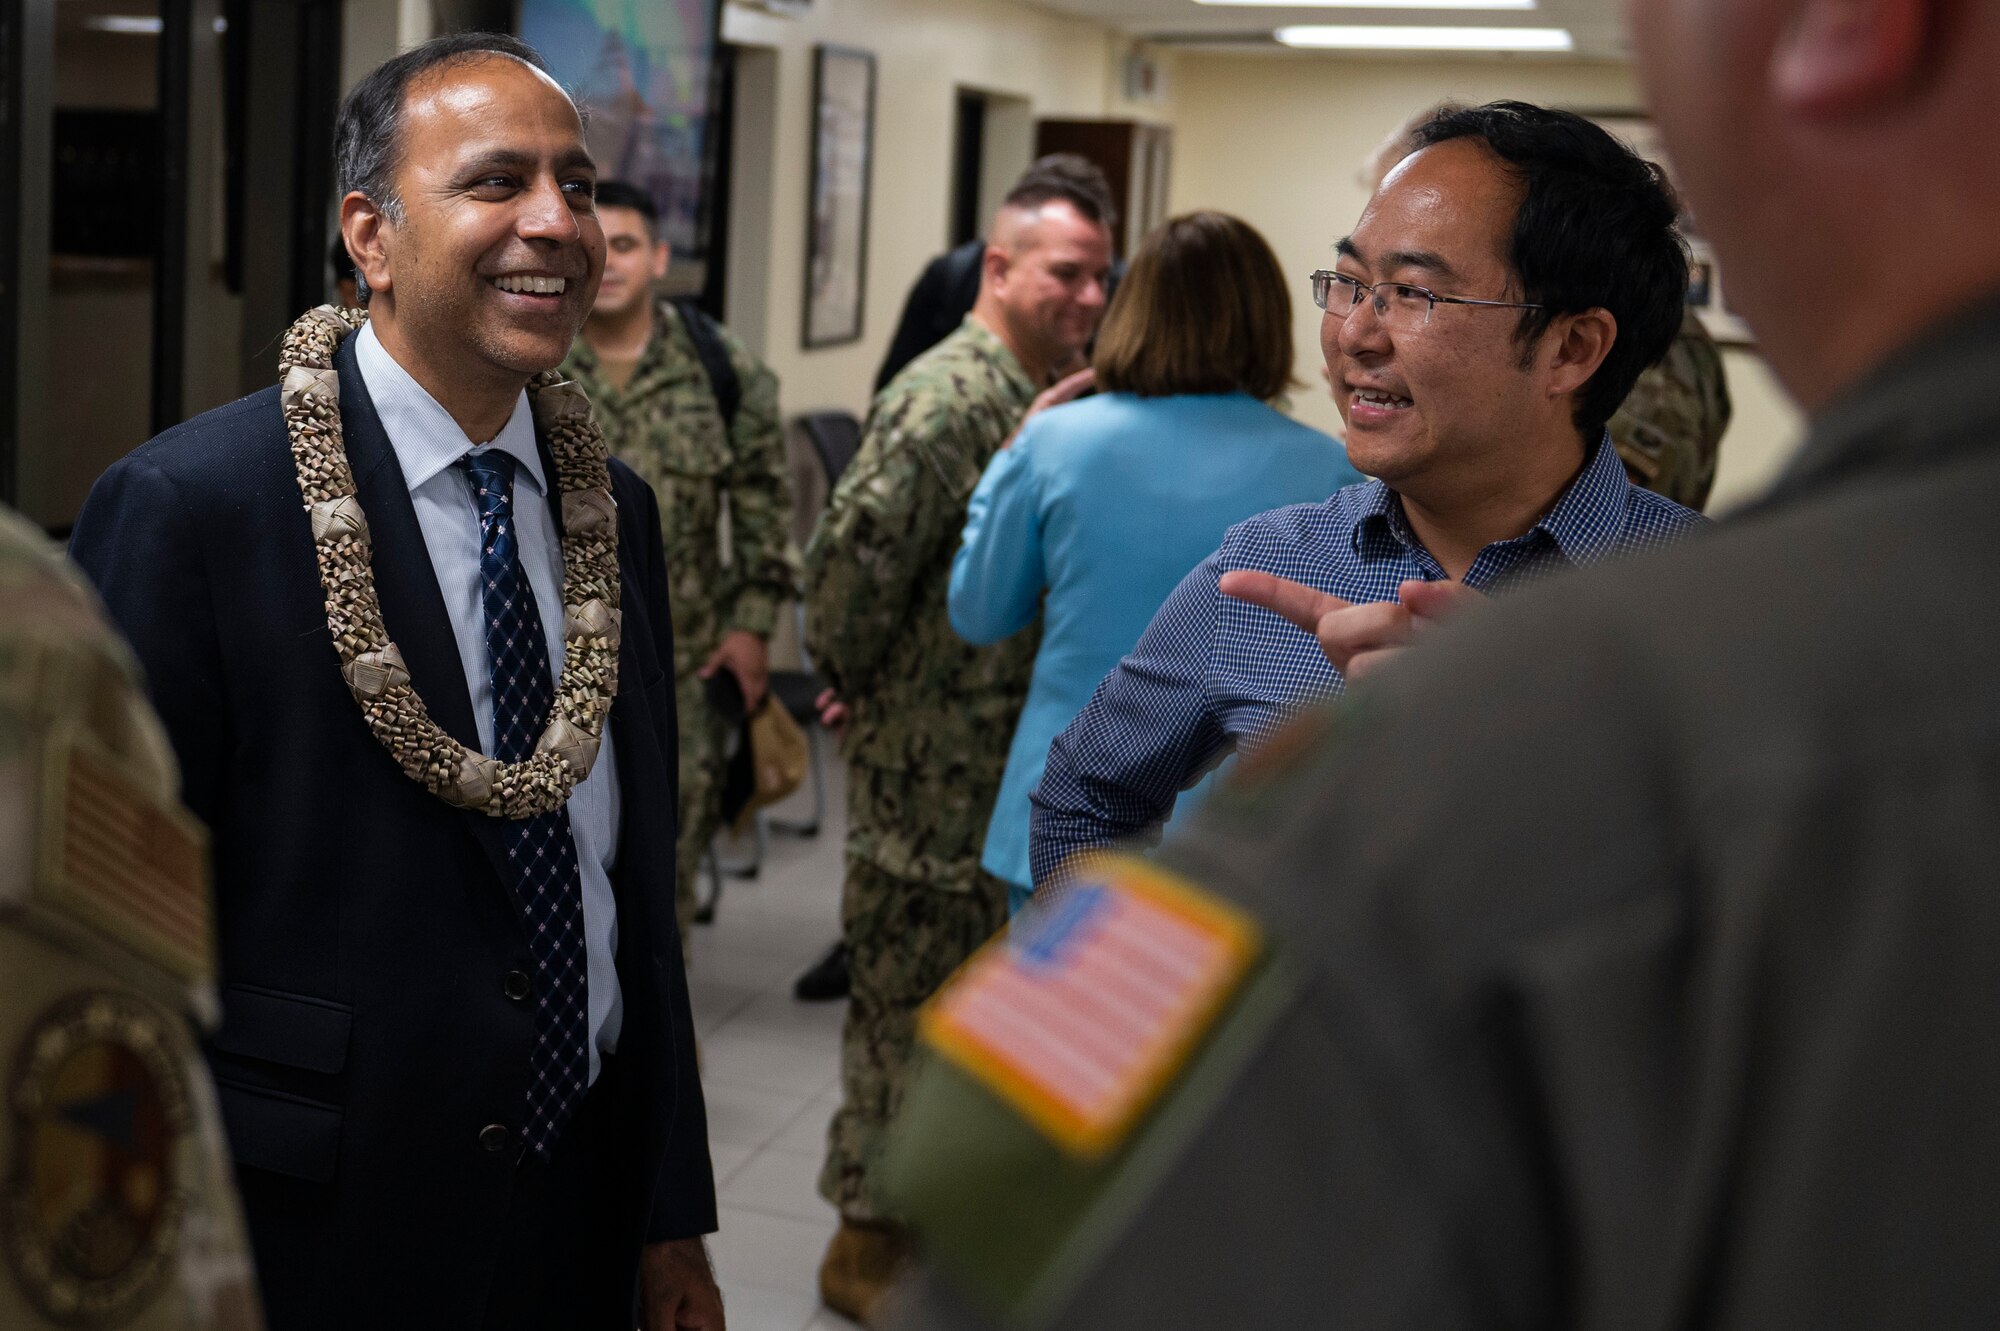 Representative Raja Krishnamoorthi and Representative Andy Kim speak with members of Team Andersen during a visit at Andersen Air Force Base, Guam, July 31, 2022. Krishnamoorthi and Kim accompanied Speaker of the U.S. House of Representatives Nancy Pelosi on a visit to Guam, which focused on bilateral relationships, security cooperation and climate change. (U.S. Air Force photo by Staff Sgt. Suzie Plotnikov)